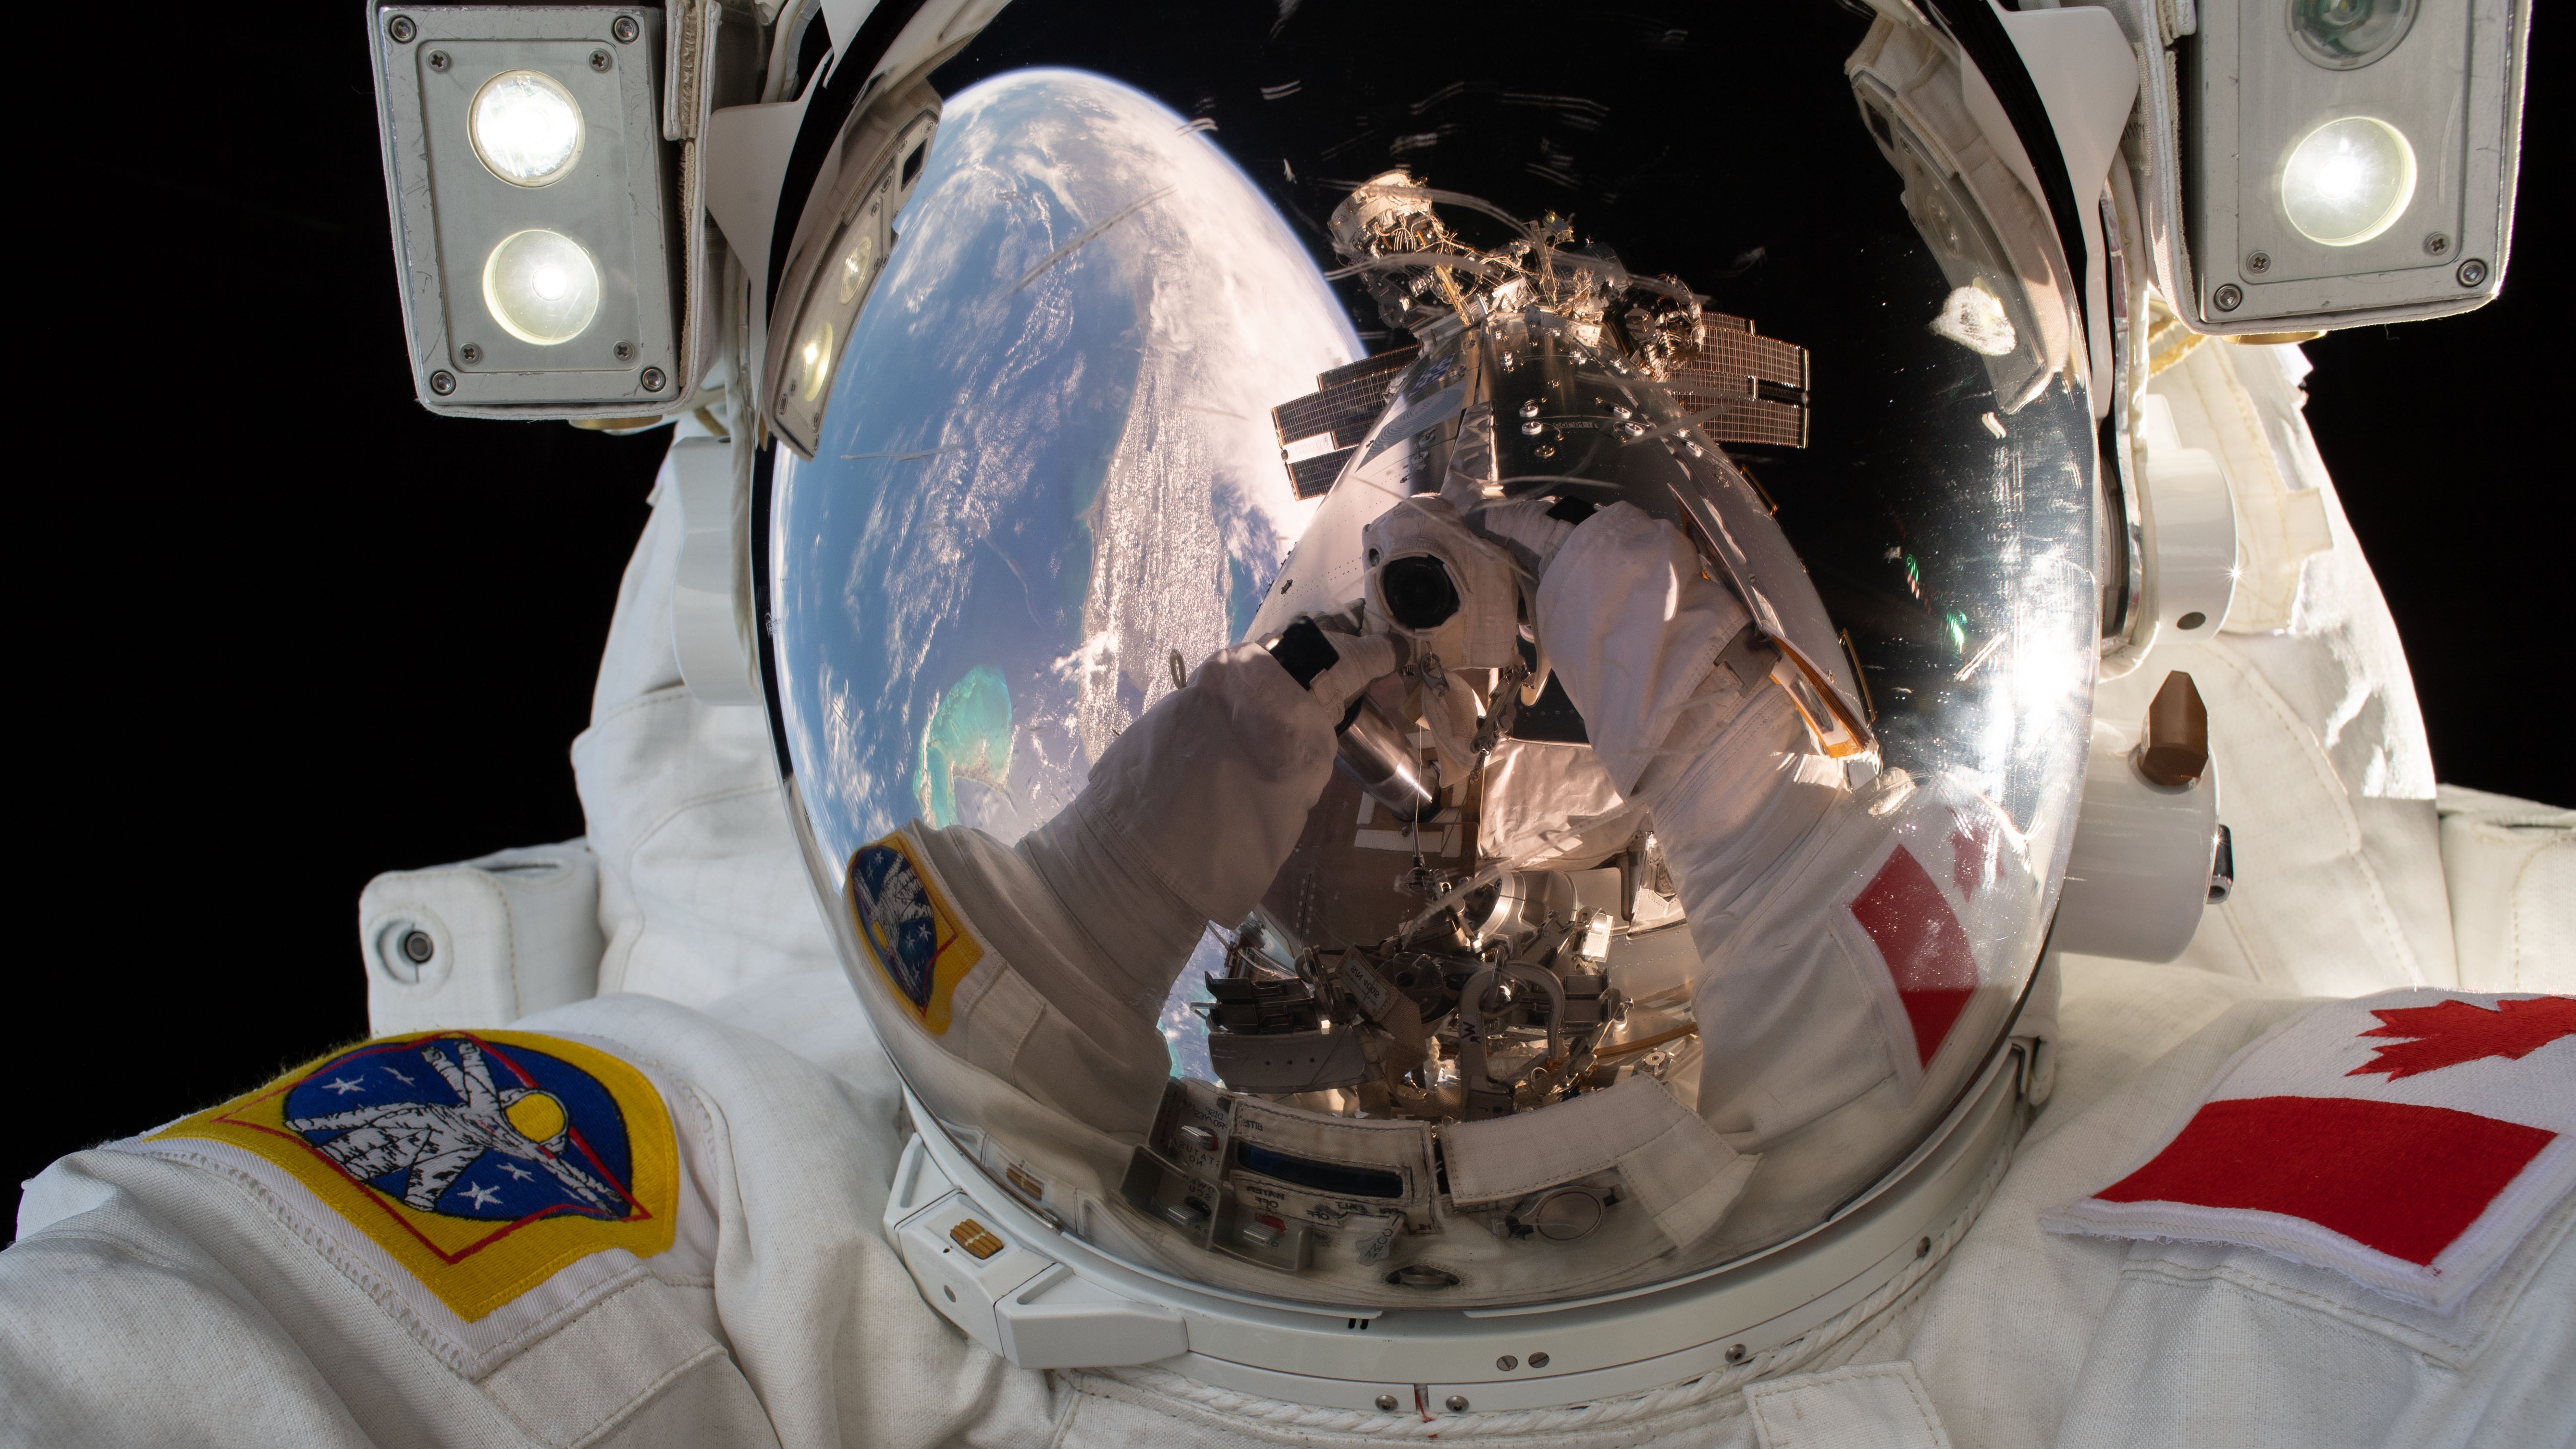 Canadian Space Agency will announce new astronaut assignments Nov. 22. Here’s how to watch it live. Space